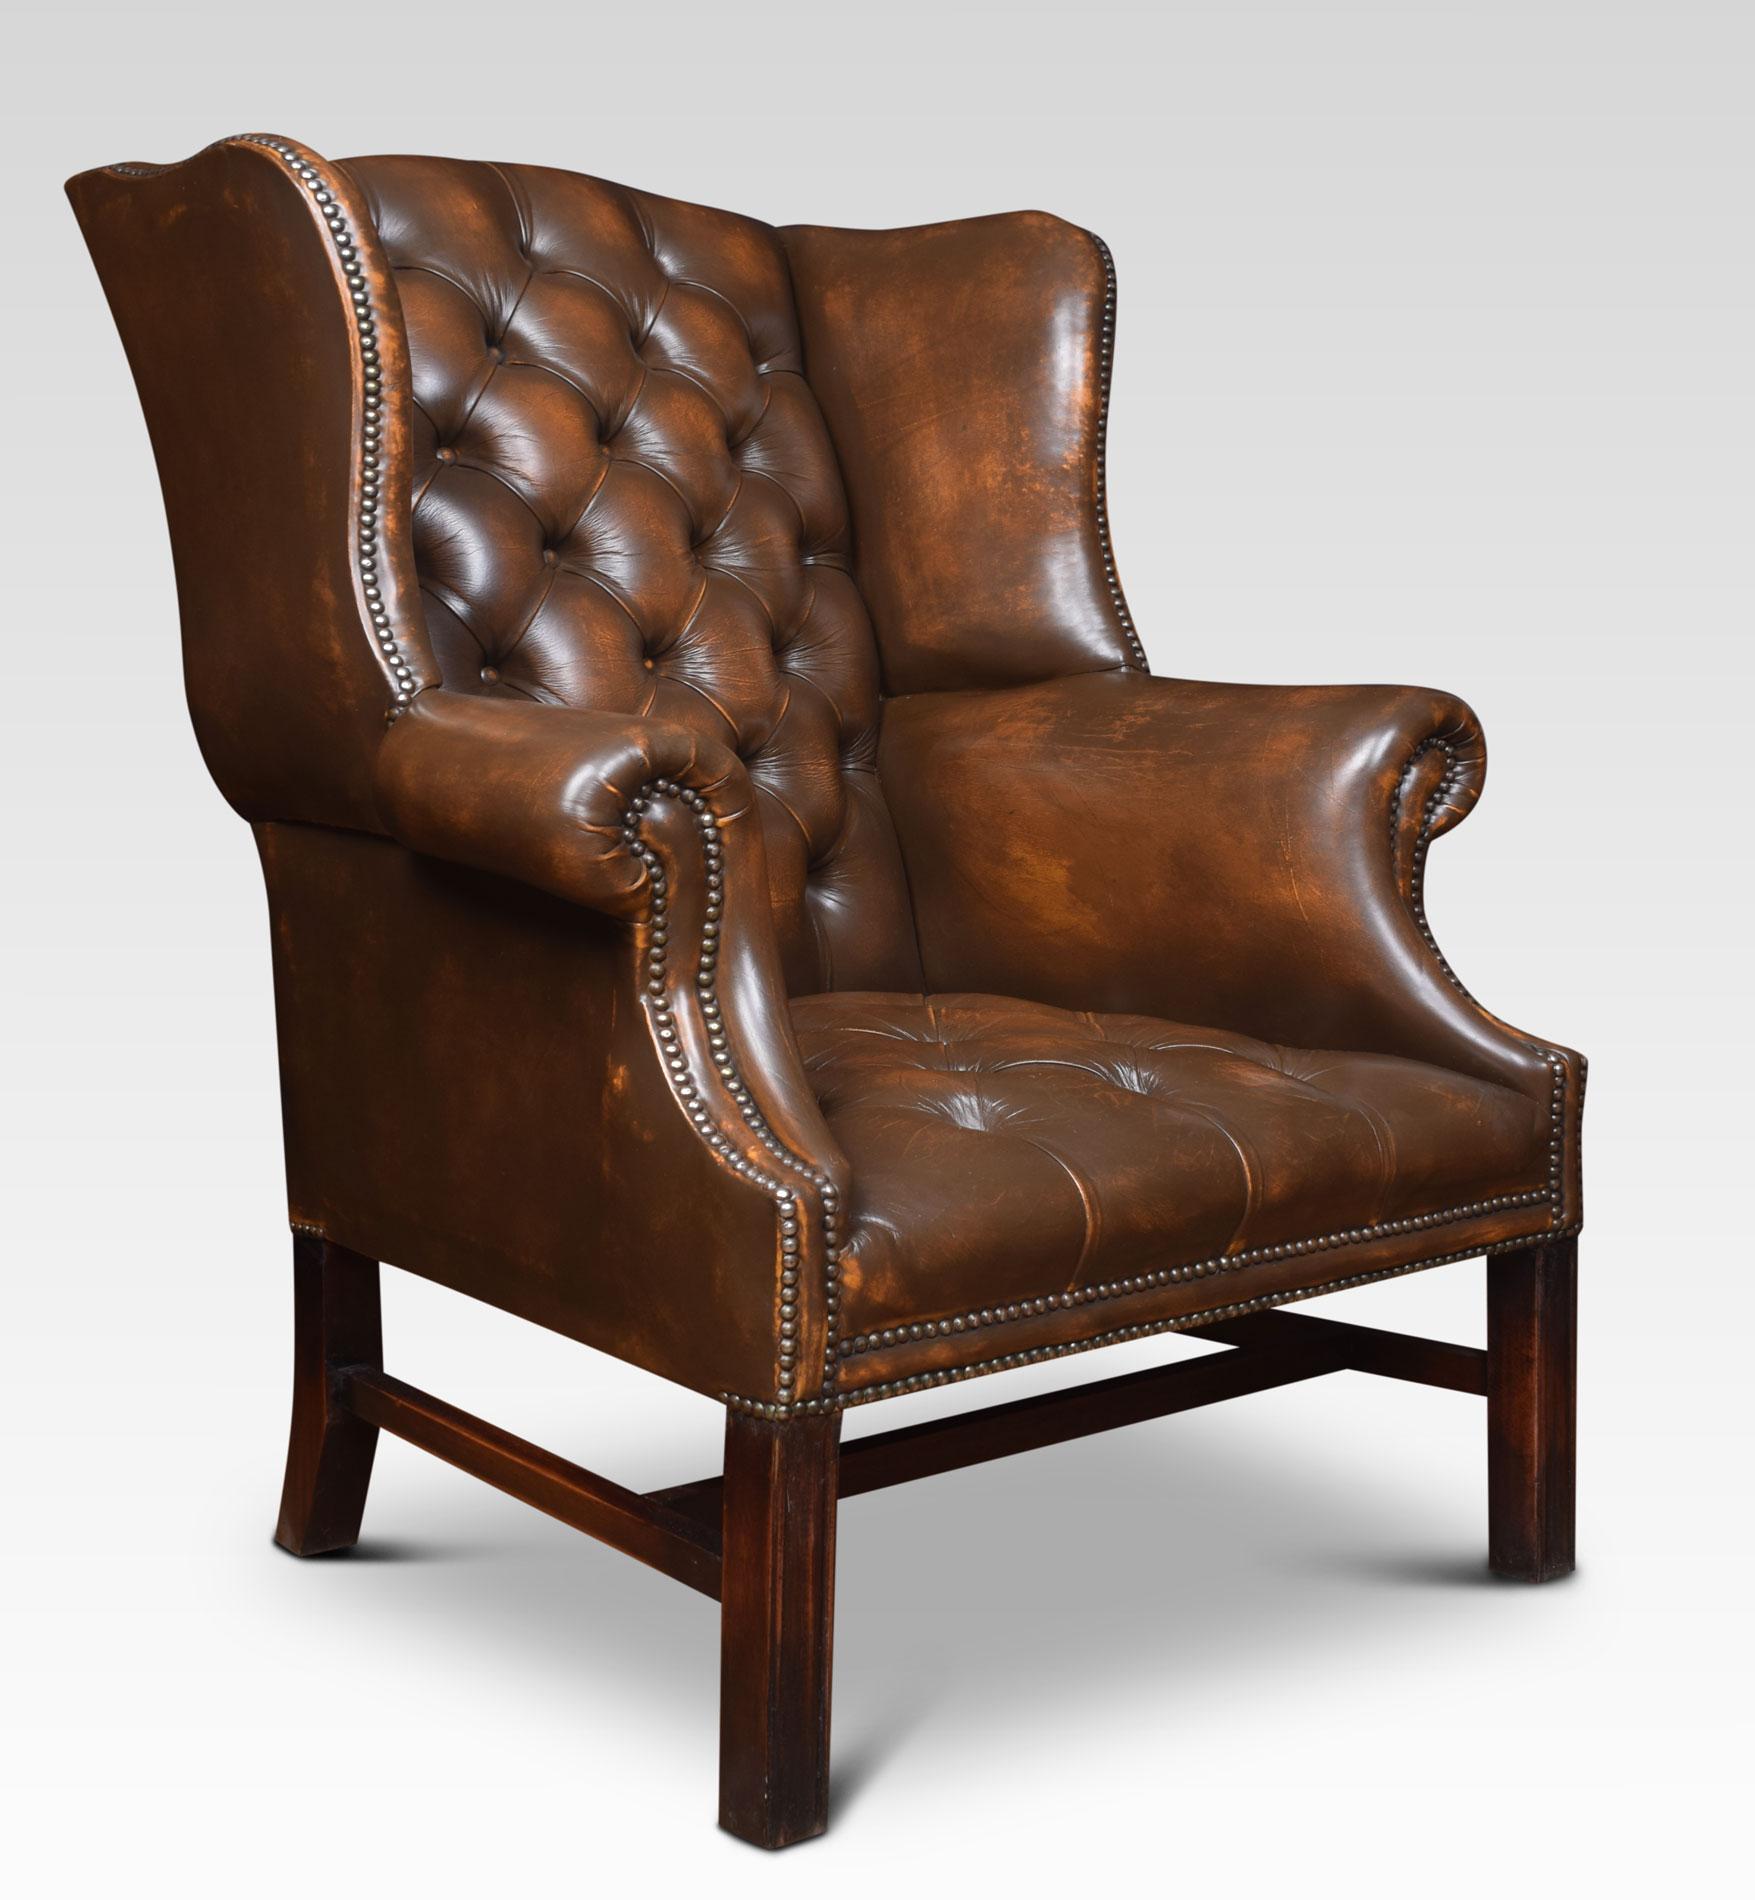 Mahogany framed wing armchair of generous proportions, the arched top above deep buttoned back, upholstered arms and seat in brown leather, raised up on square supports united by H stretcher.
Dimensions:
Height 42.5 inches height to seat 17